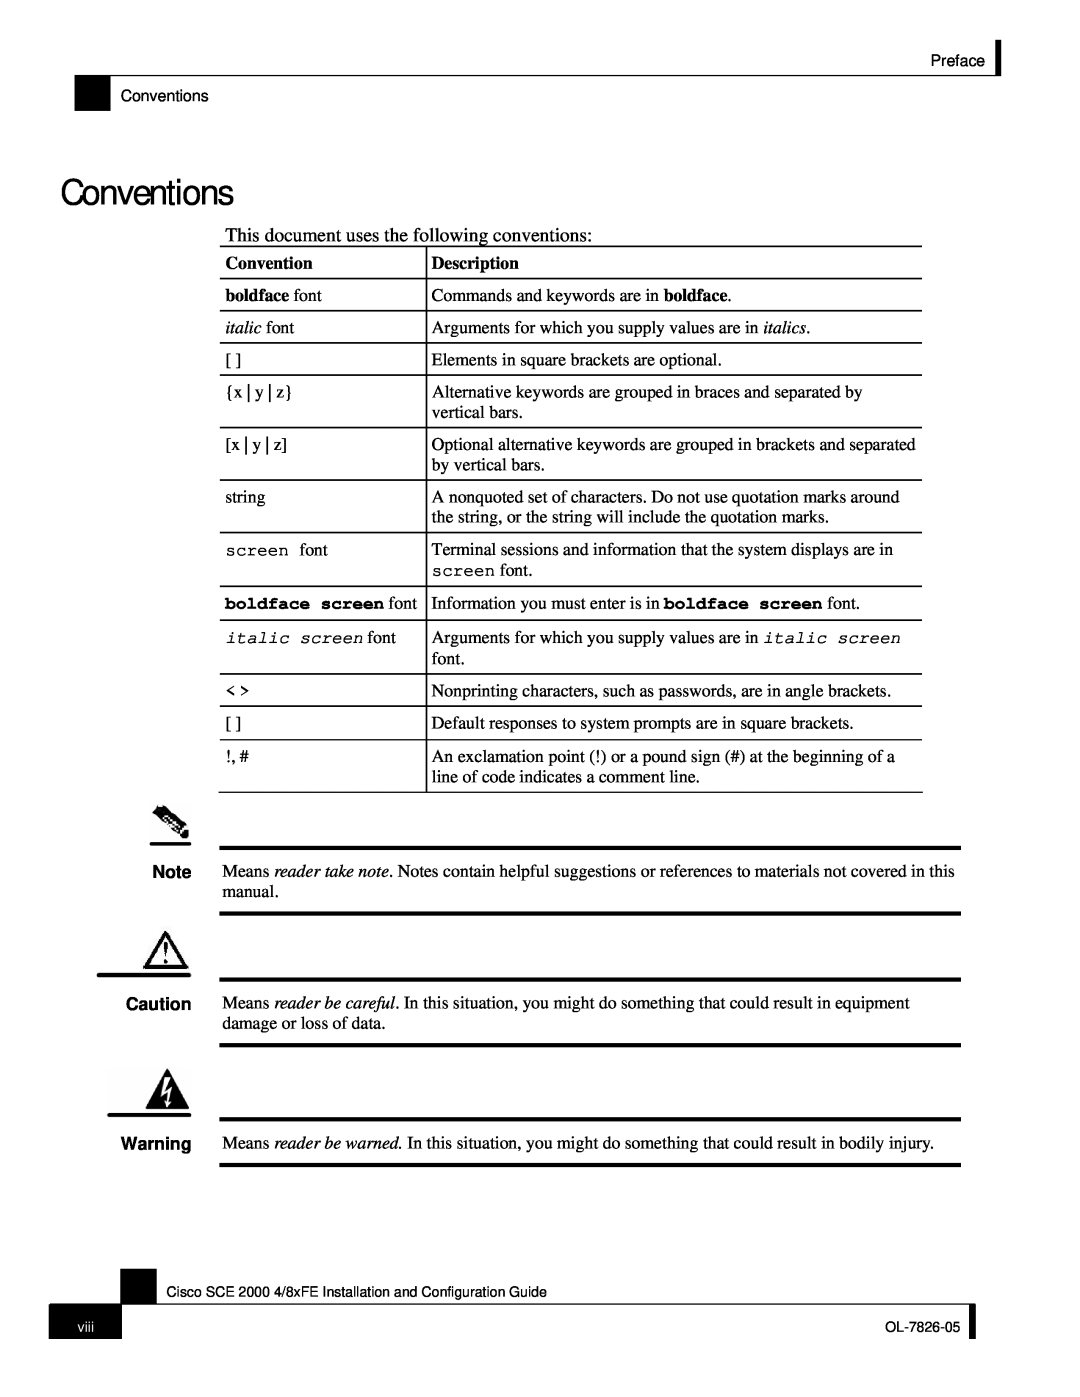 Cisco Systems SCE 2000 4/8xFE manual Conventions, This document uses the following conventions, italic screen font 